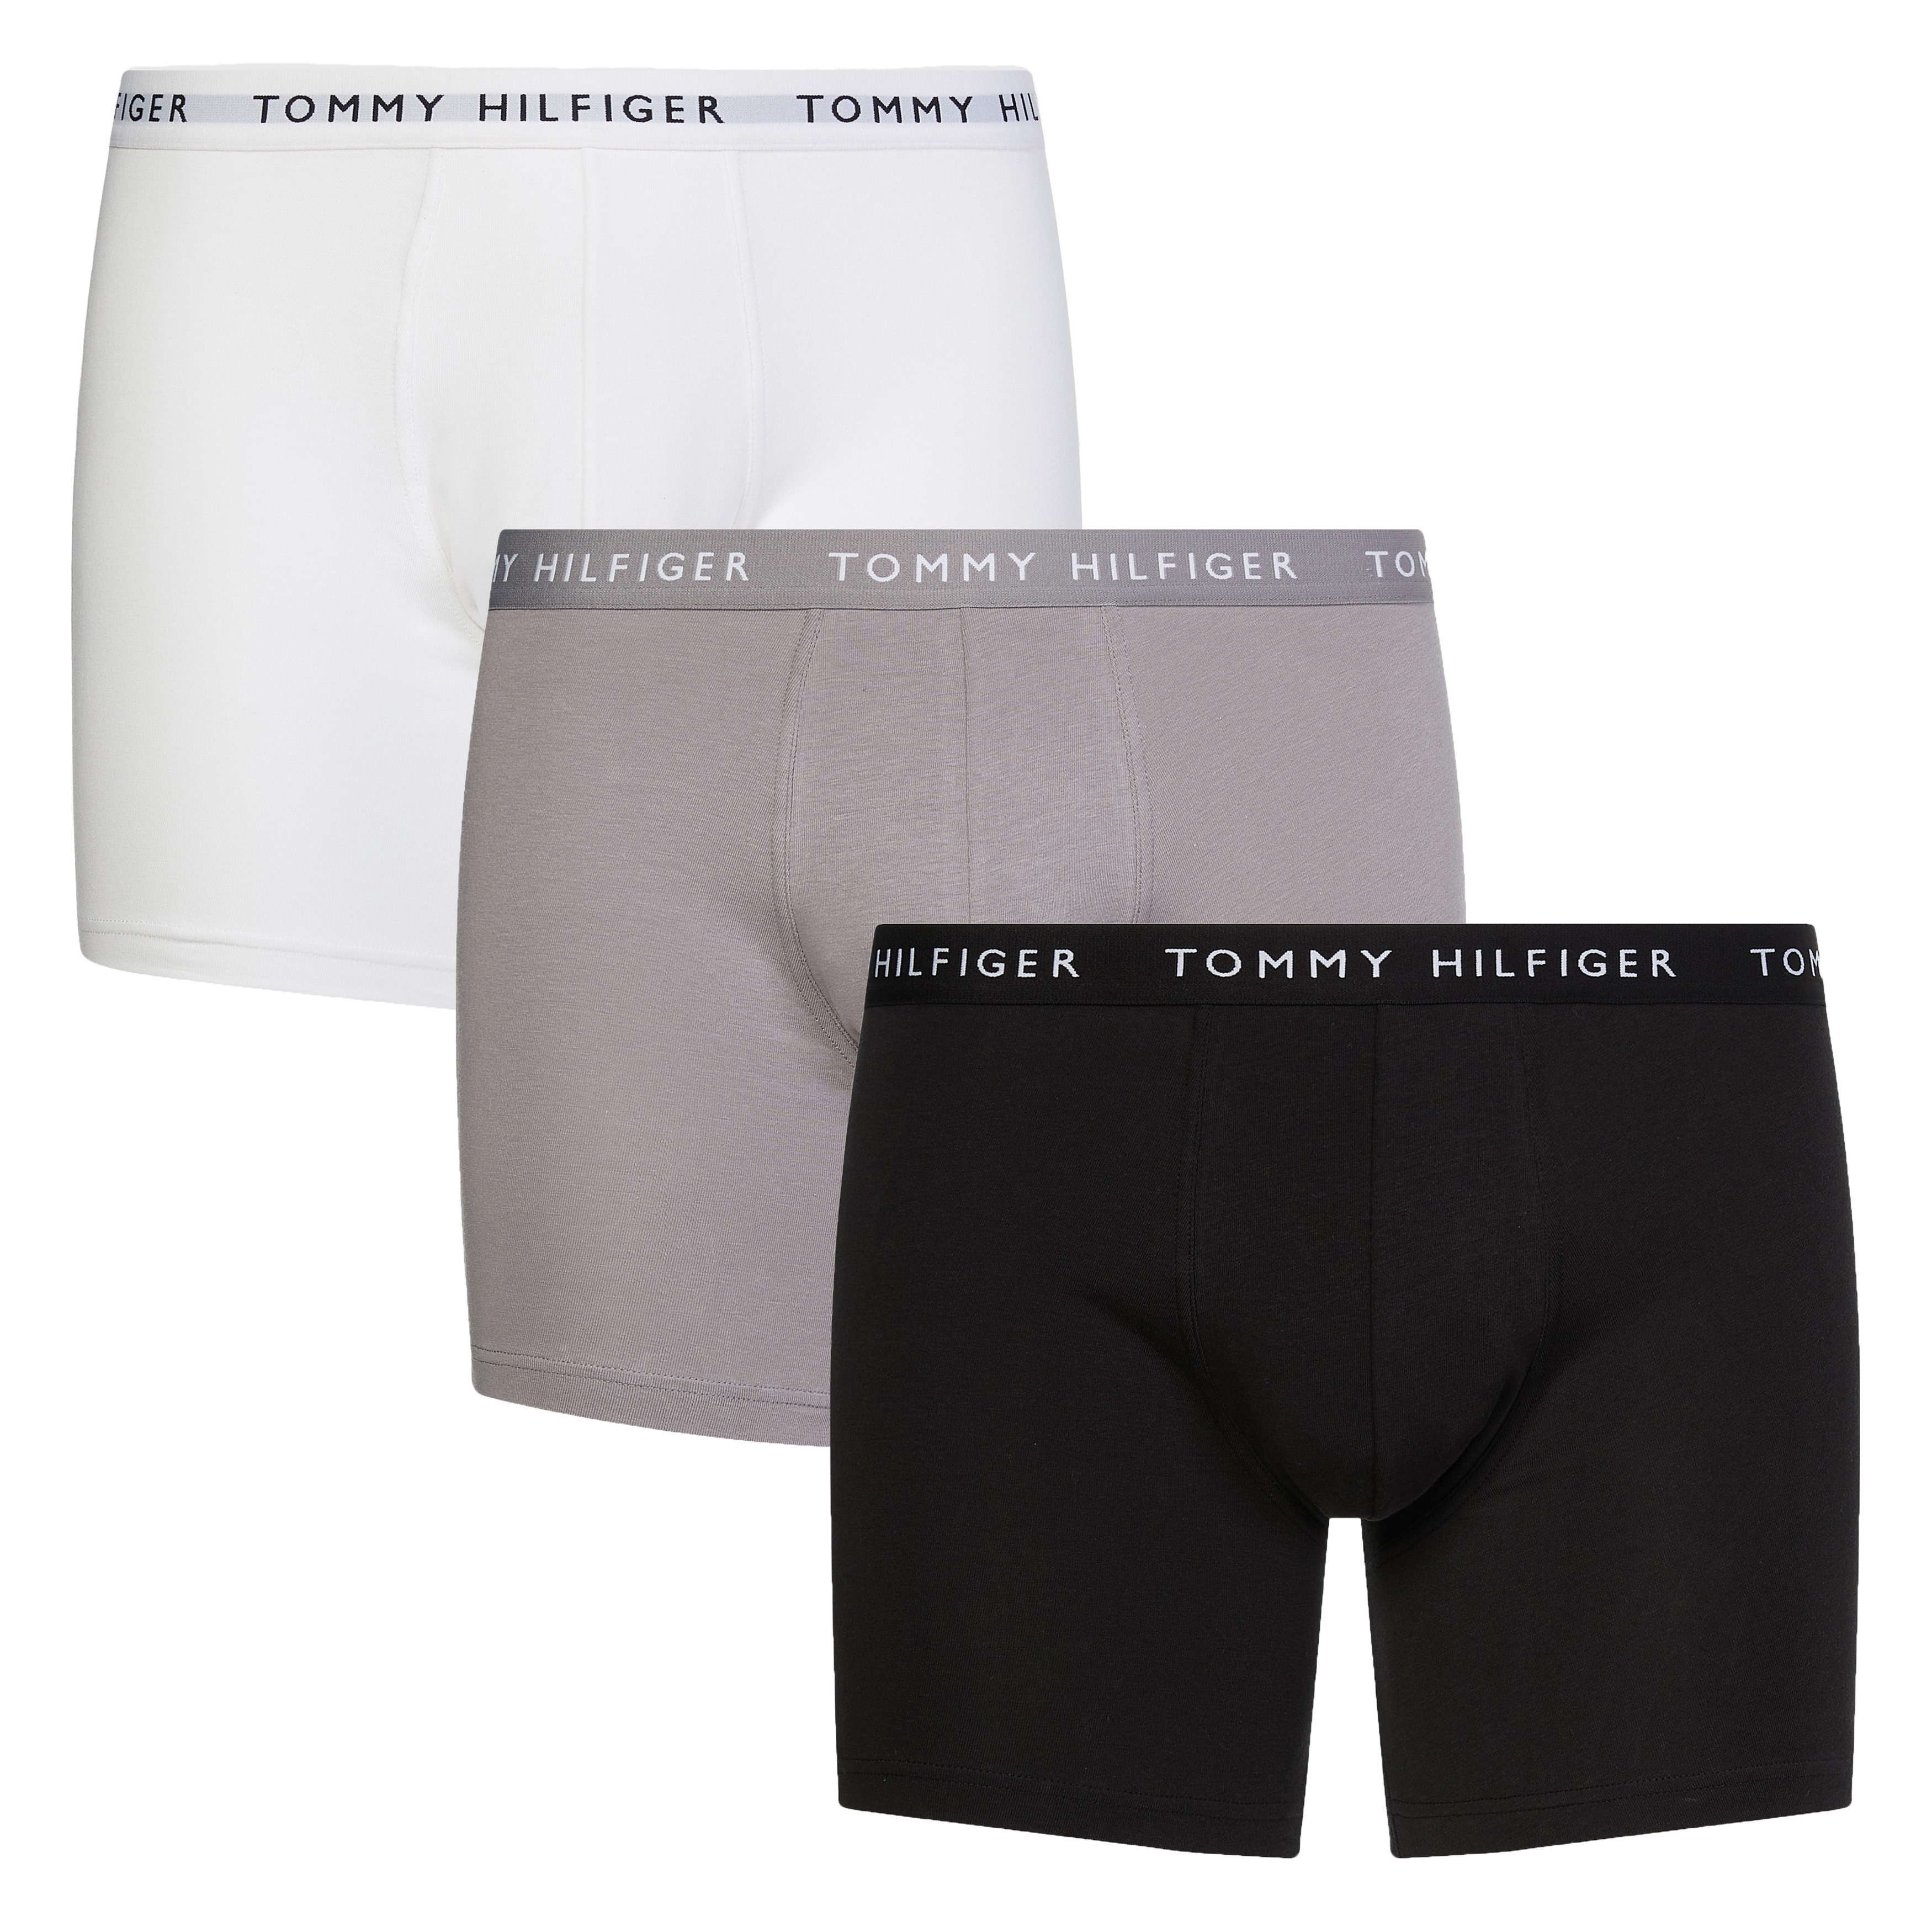 3-Pack Essential Boxer Briefs Tommy - black, grey and white - Tommy